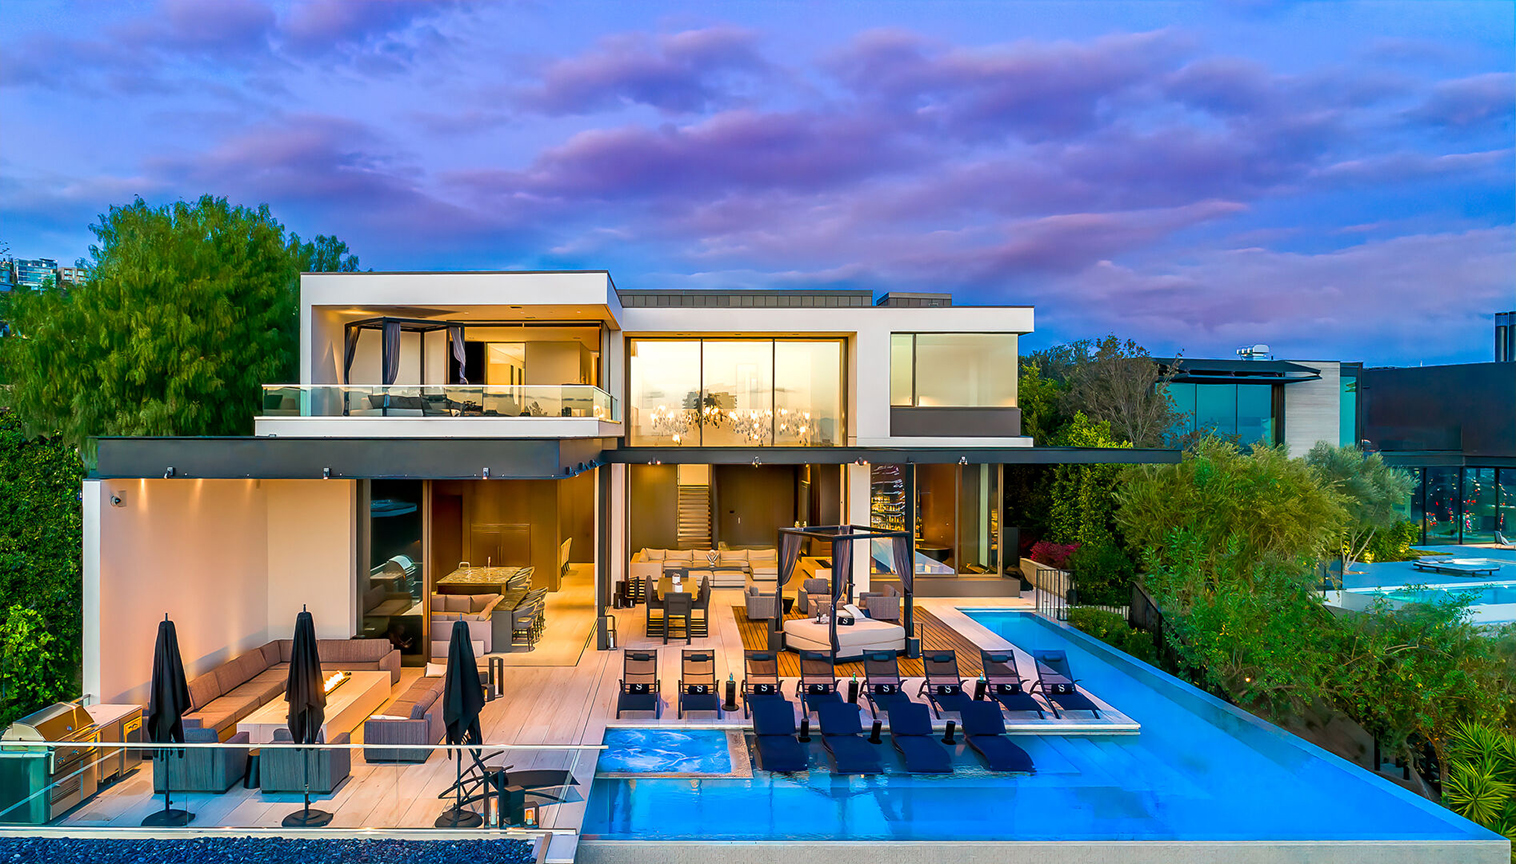 Maison De Luxe A Los Angeles Villa Rentals in Los Angeles for an Escape to Luxury | Zocha Group Blog